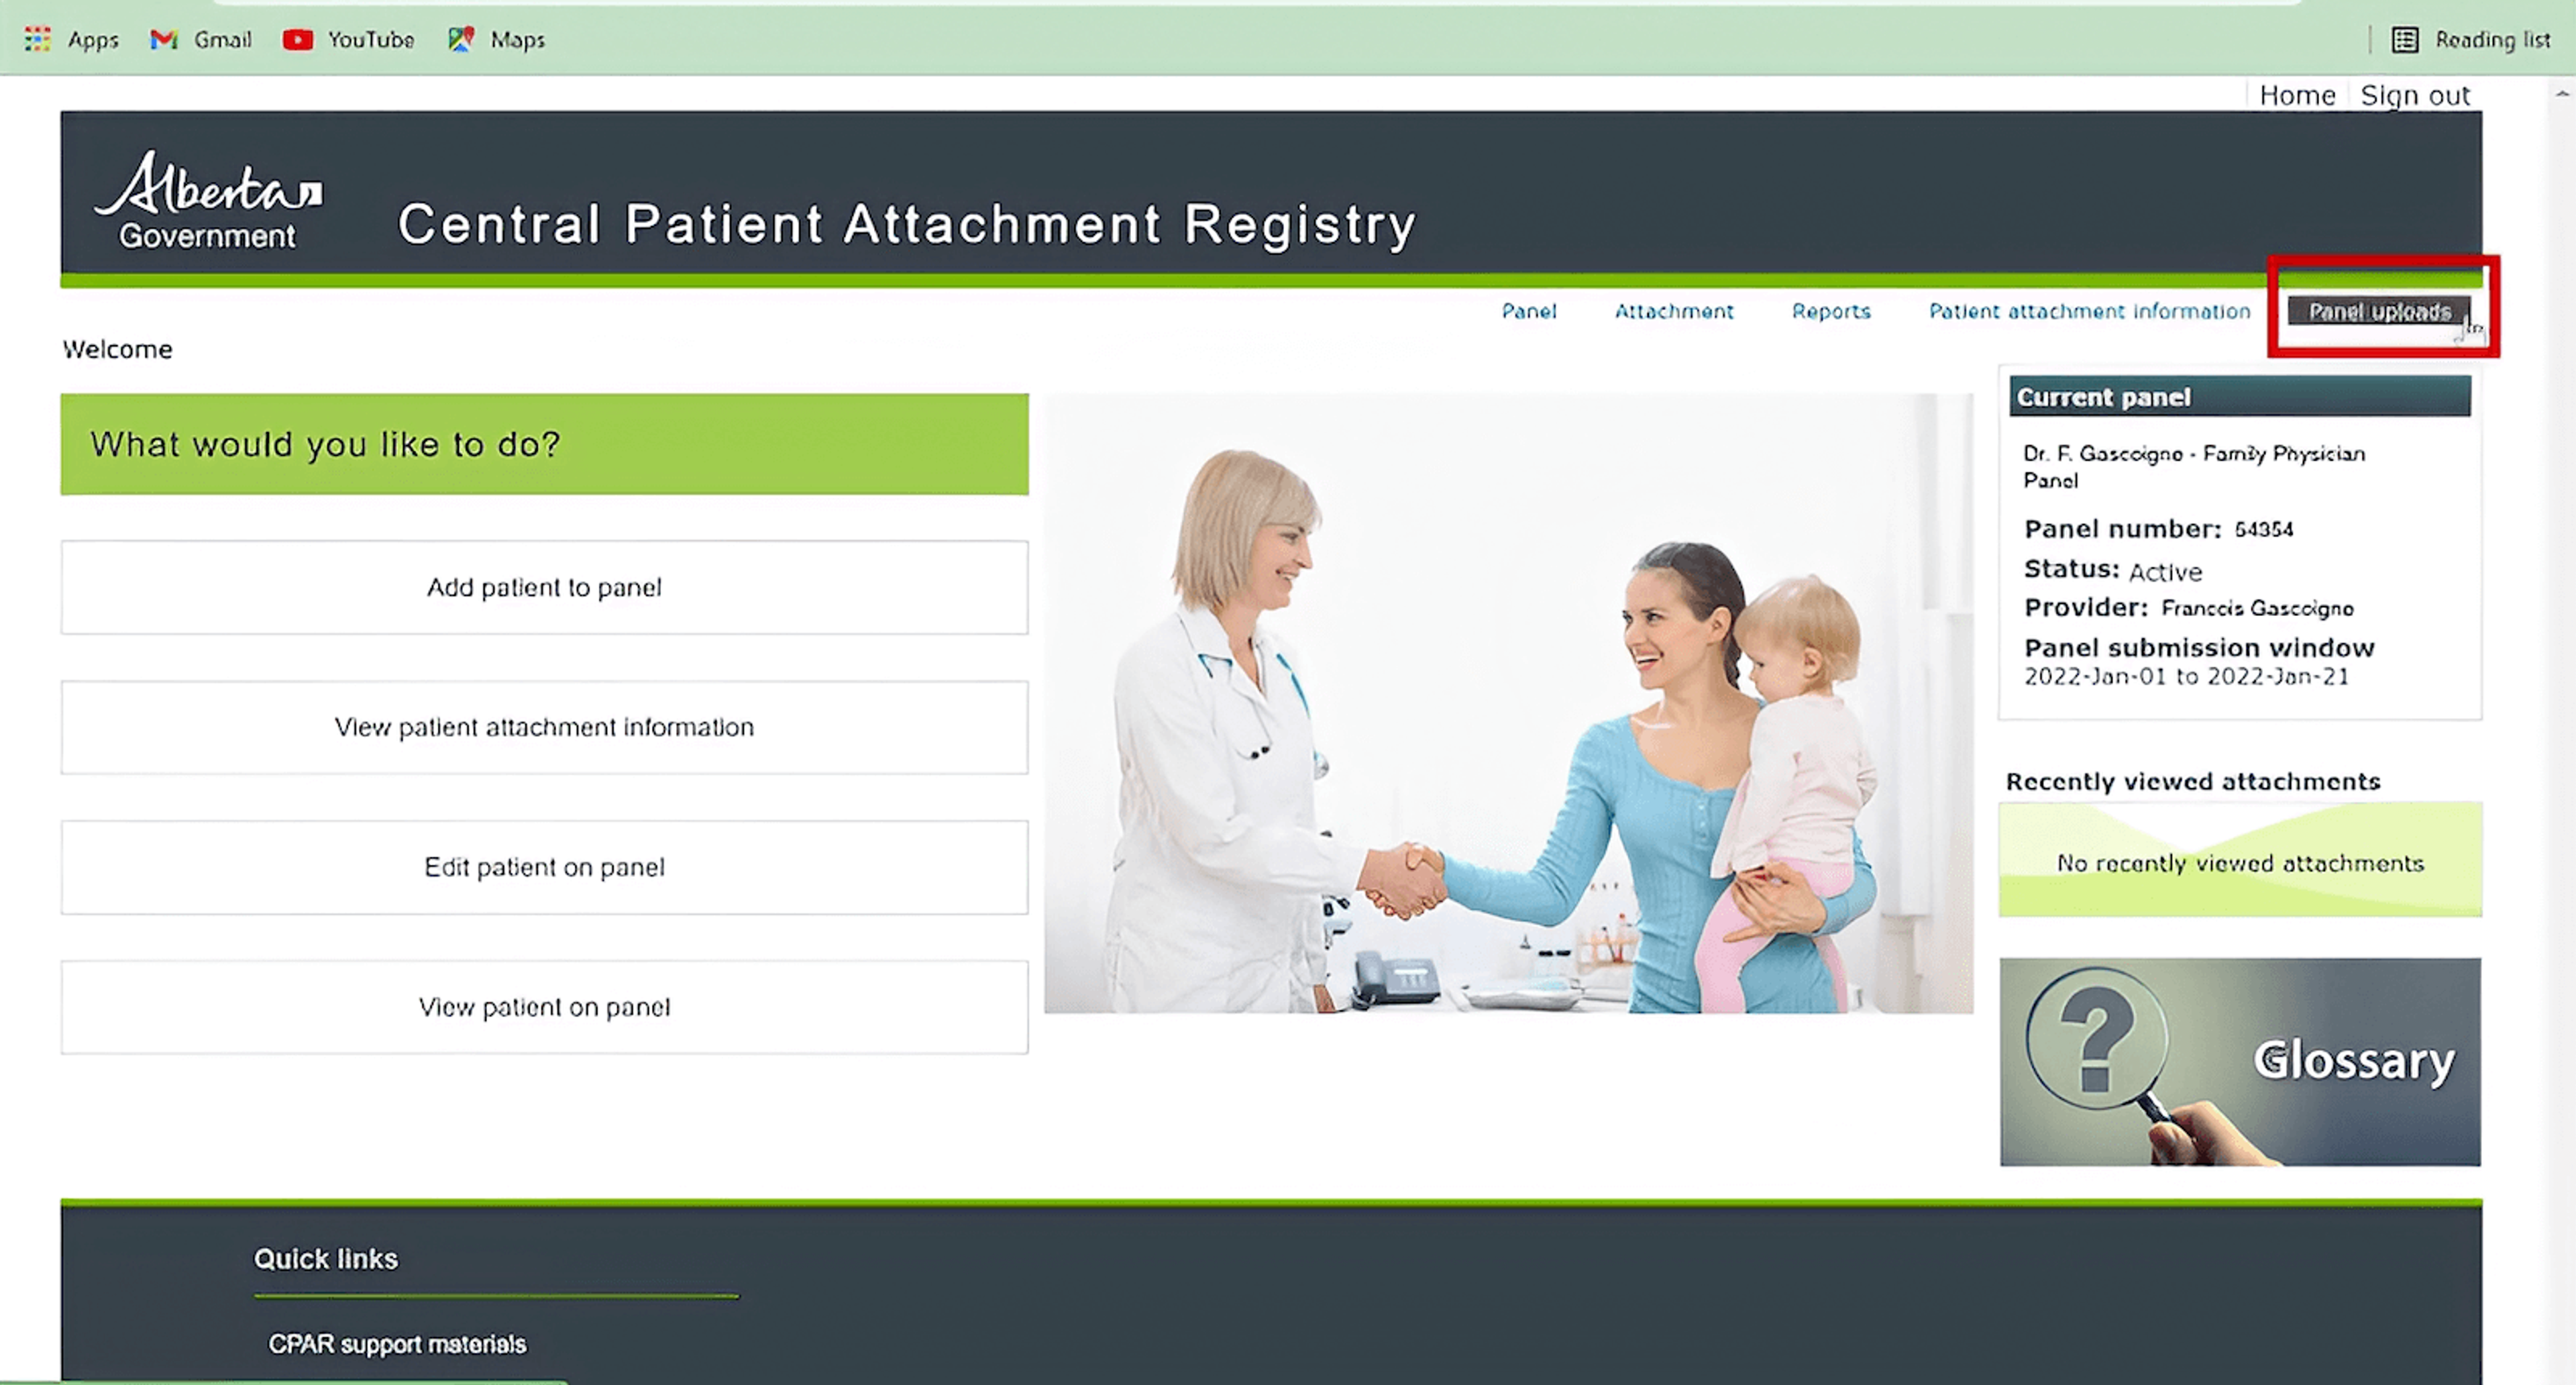 Screenshot of the Alberta Government's central patient attachment registry page, with a button labeled 'Panel uploads' highlighted in the top right corner.